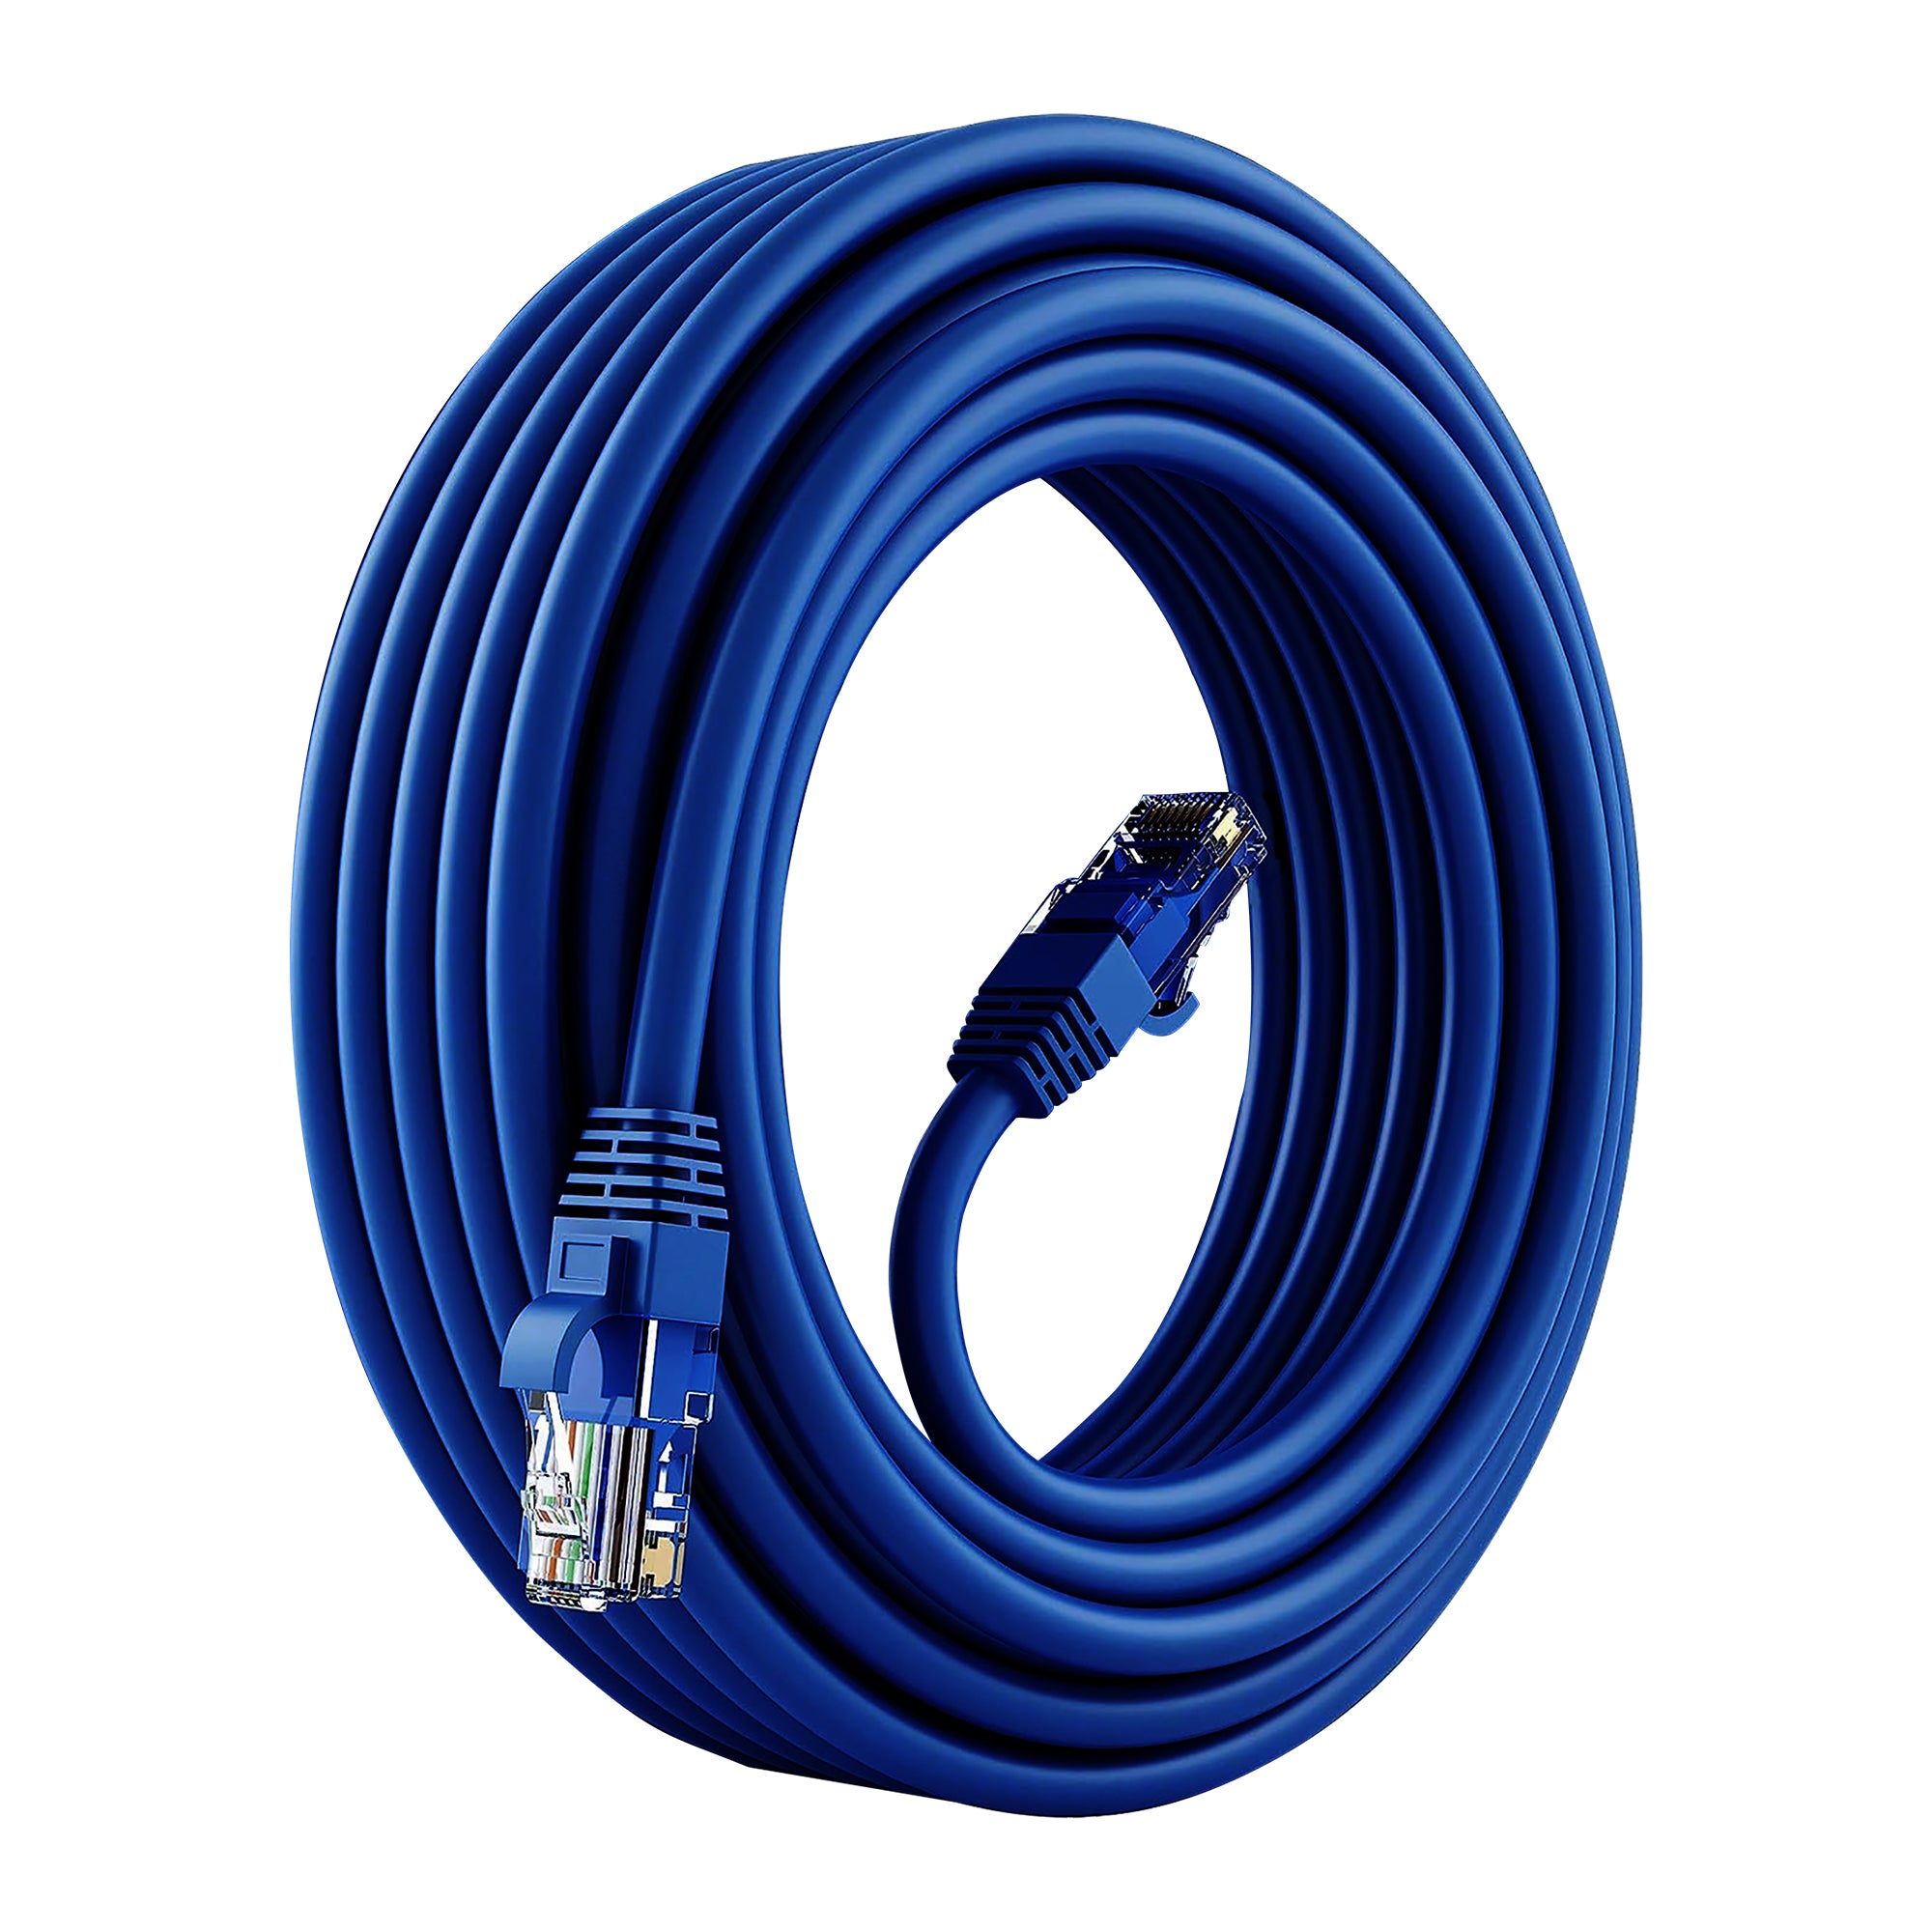 MATEIN Cat 7 Ethernet Cable,100 Ft Network Cable for Modem Router, High  Speed Flat Internet Cord with Clips Rj45 Snagless Connector Fast Computer  LAN